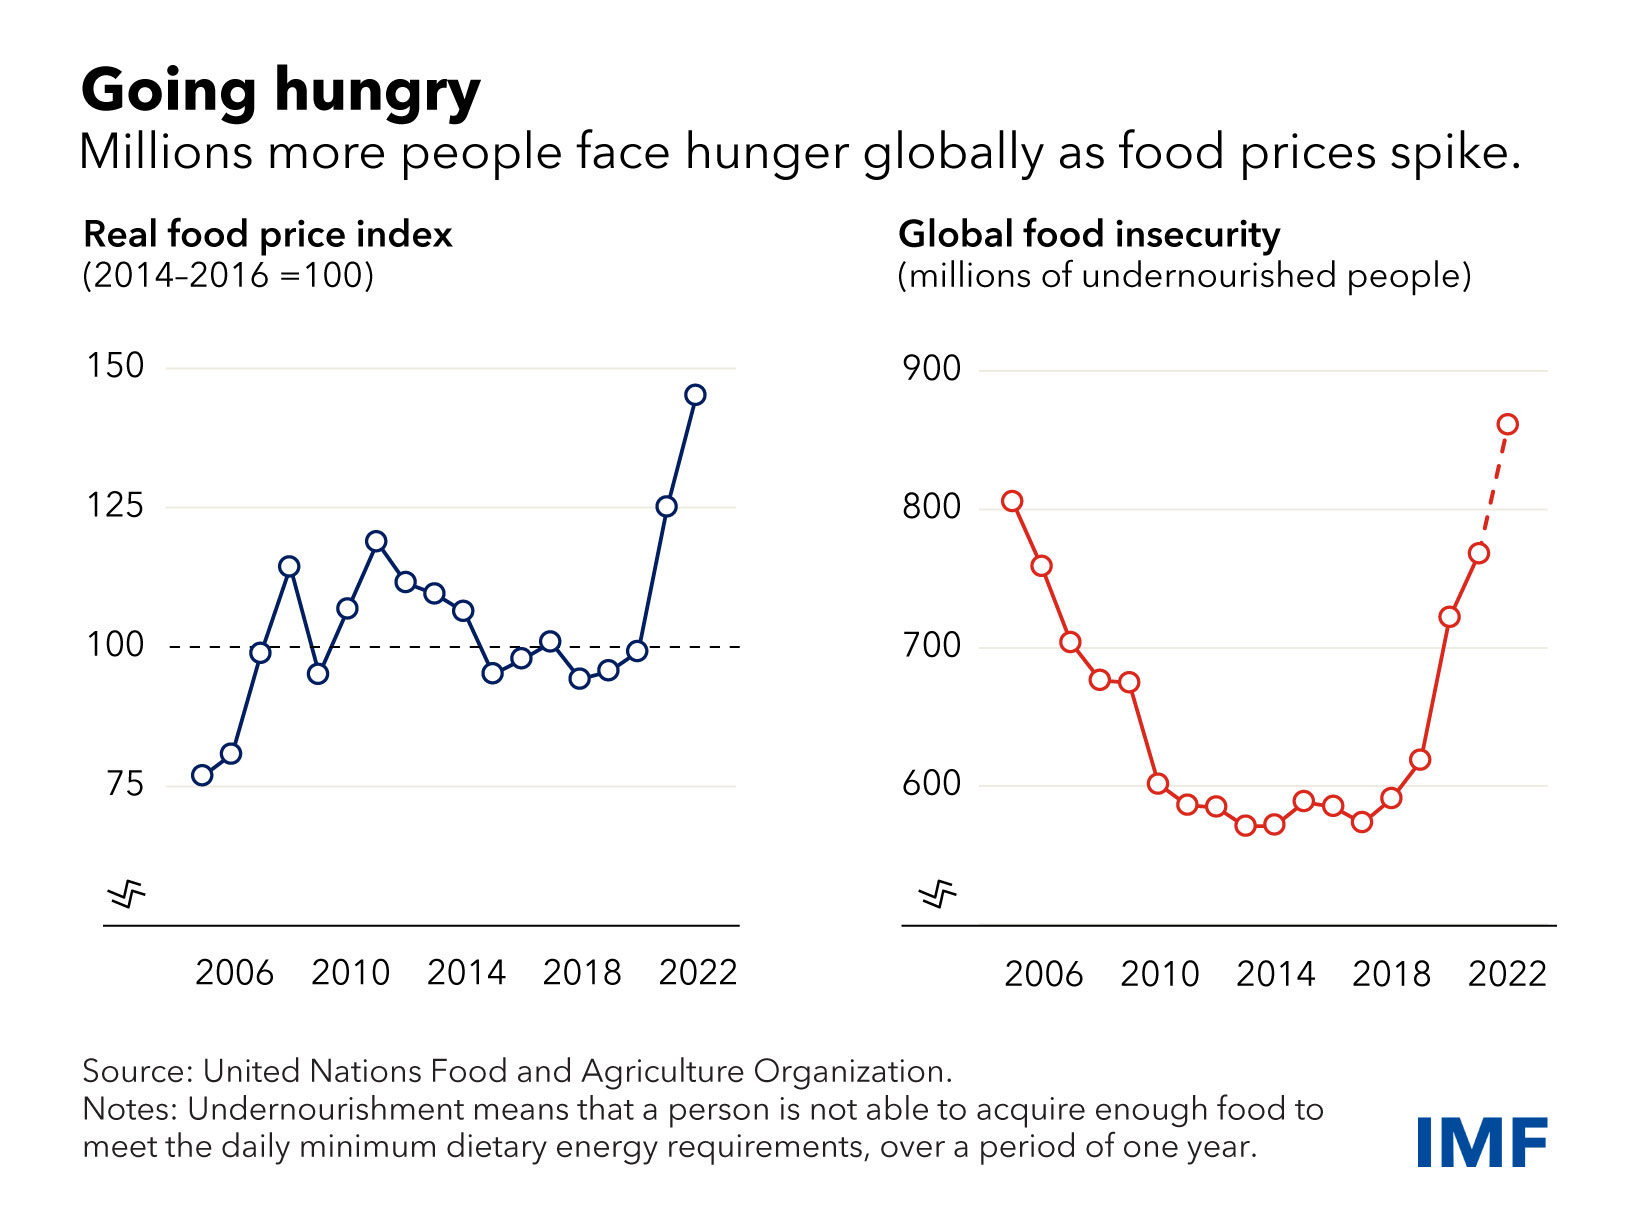 IMF expands emergency aid for countries hit hard by food crisis